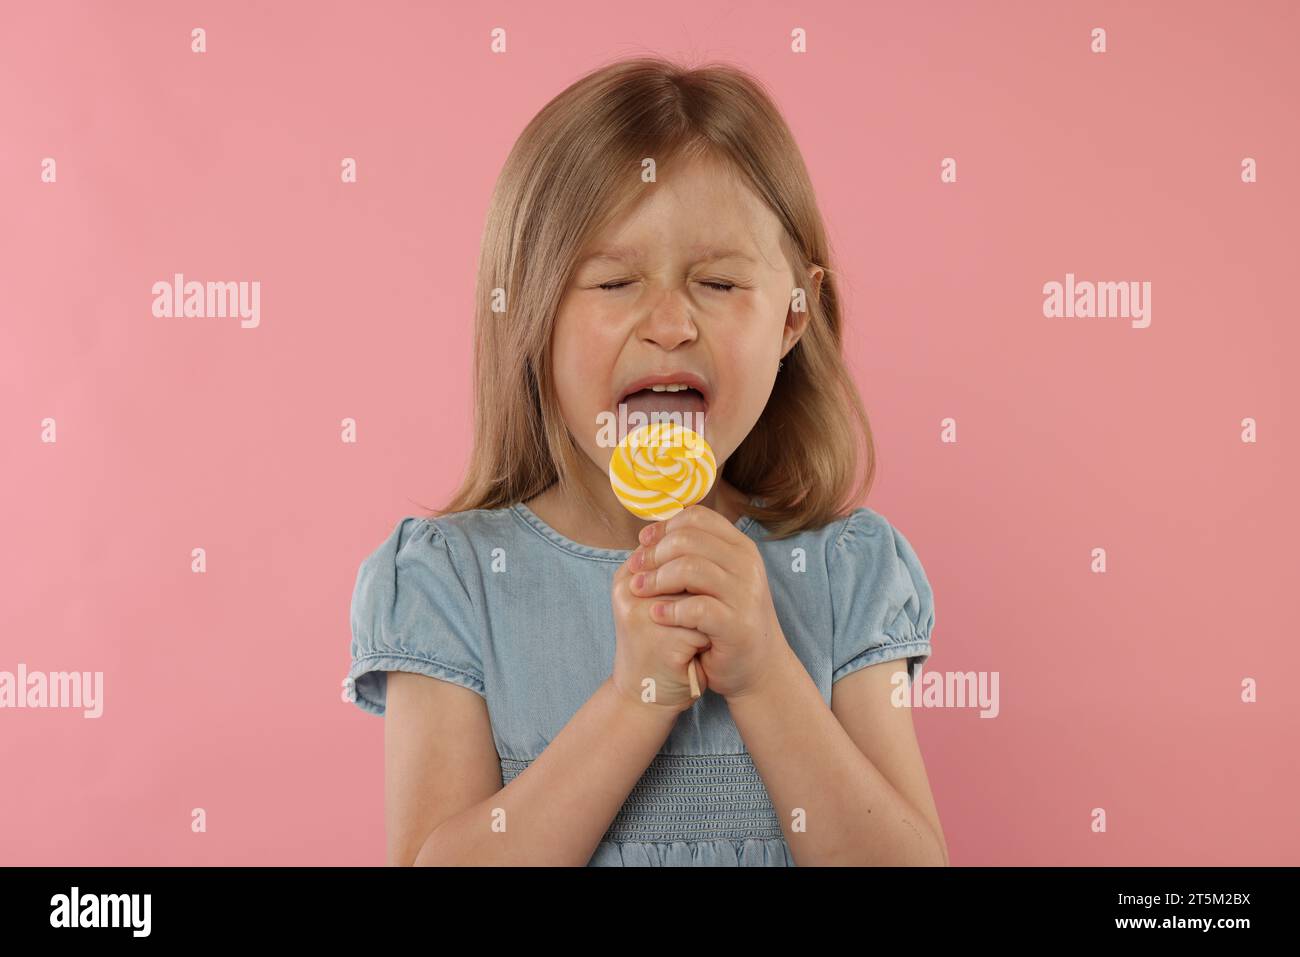 Cute girl licking lollipop on pink background Stock Photo